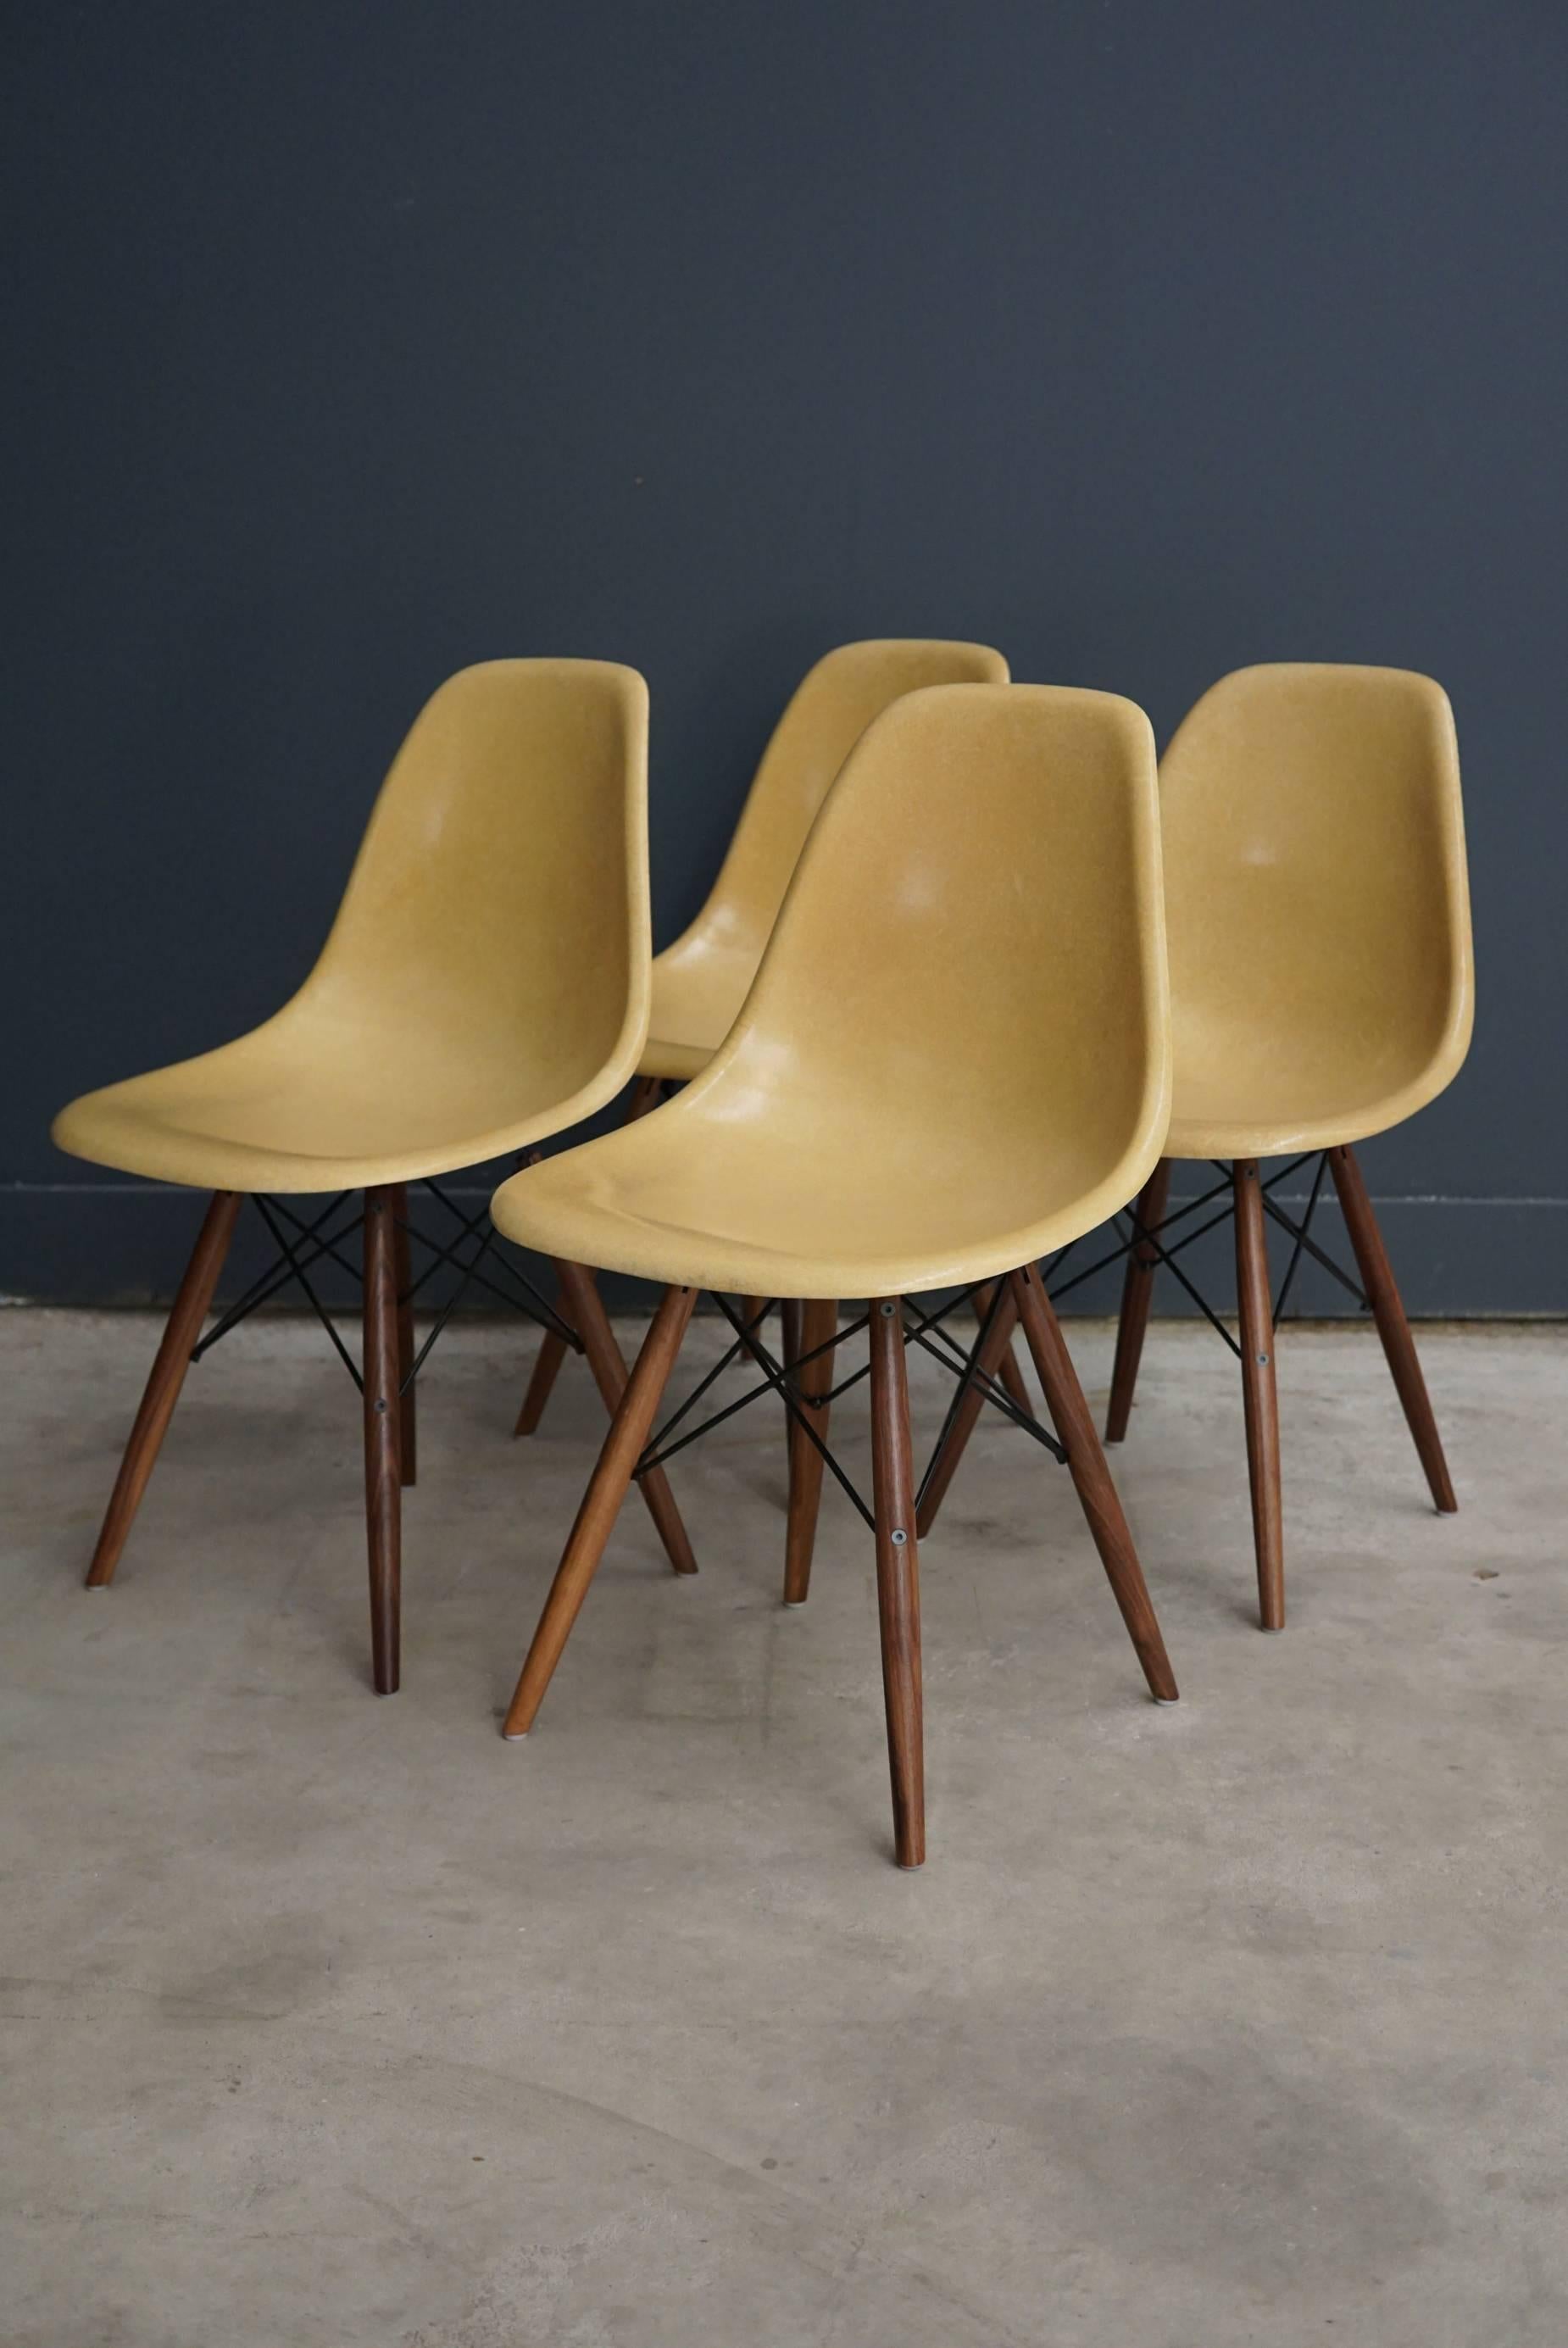 This vintage DSW dining chair set, consisting of four chairs, was designed by Charles & Ray Eames and manufactured by Herman Miller in the 1970s. This design Classic features an ochre fiberglass seat which sits on walnut wooden legs. It is in a good